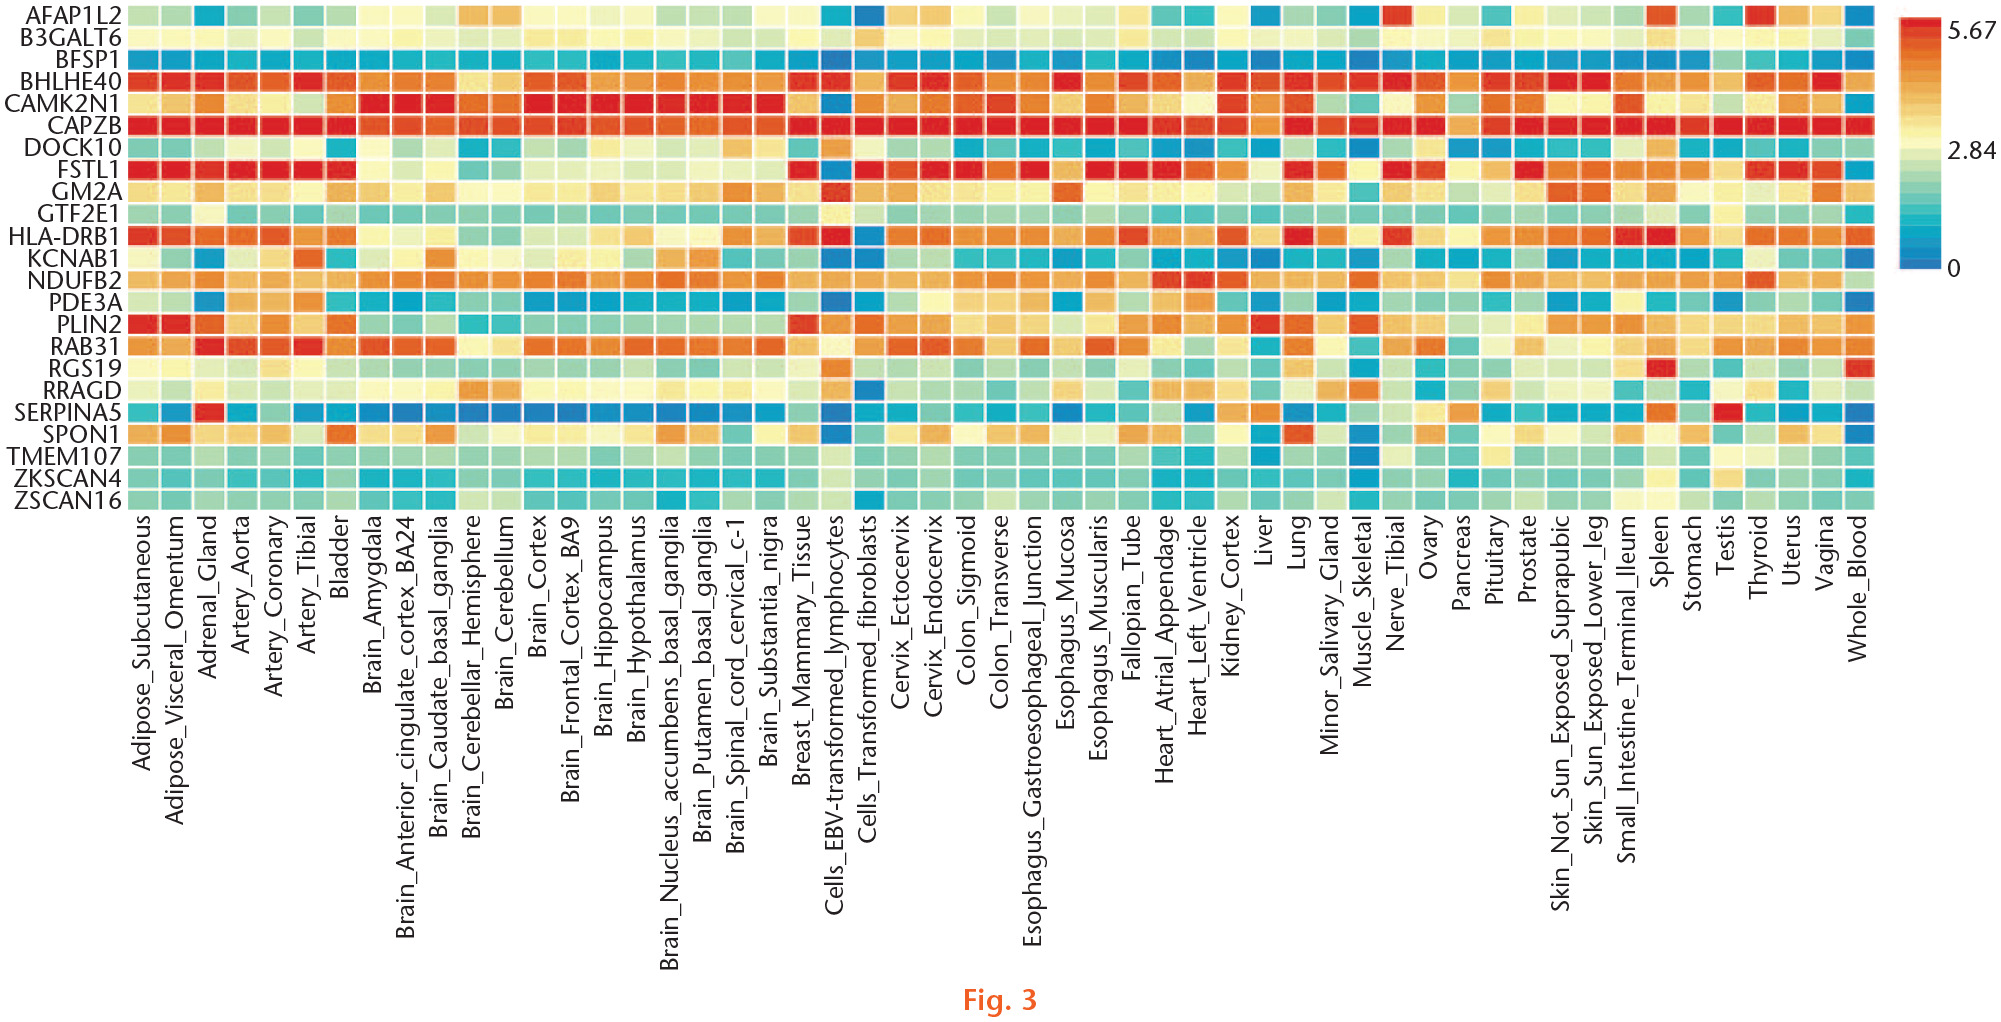 Fig. 3 
            Gene expression heat map of the identified common genes shared by transcriptome-wide association studies (TWAS) and messenger RNA (mRNA) expression data of knee osteoarthritis (OA).
          